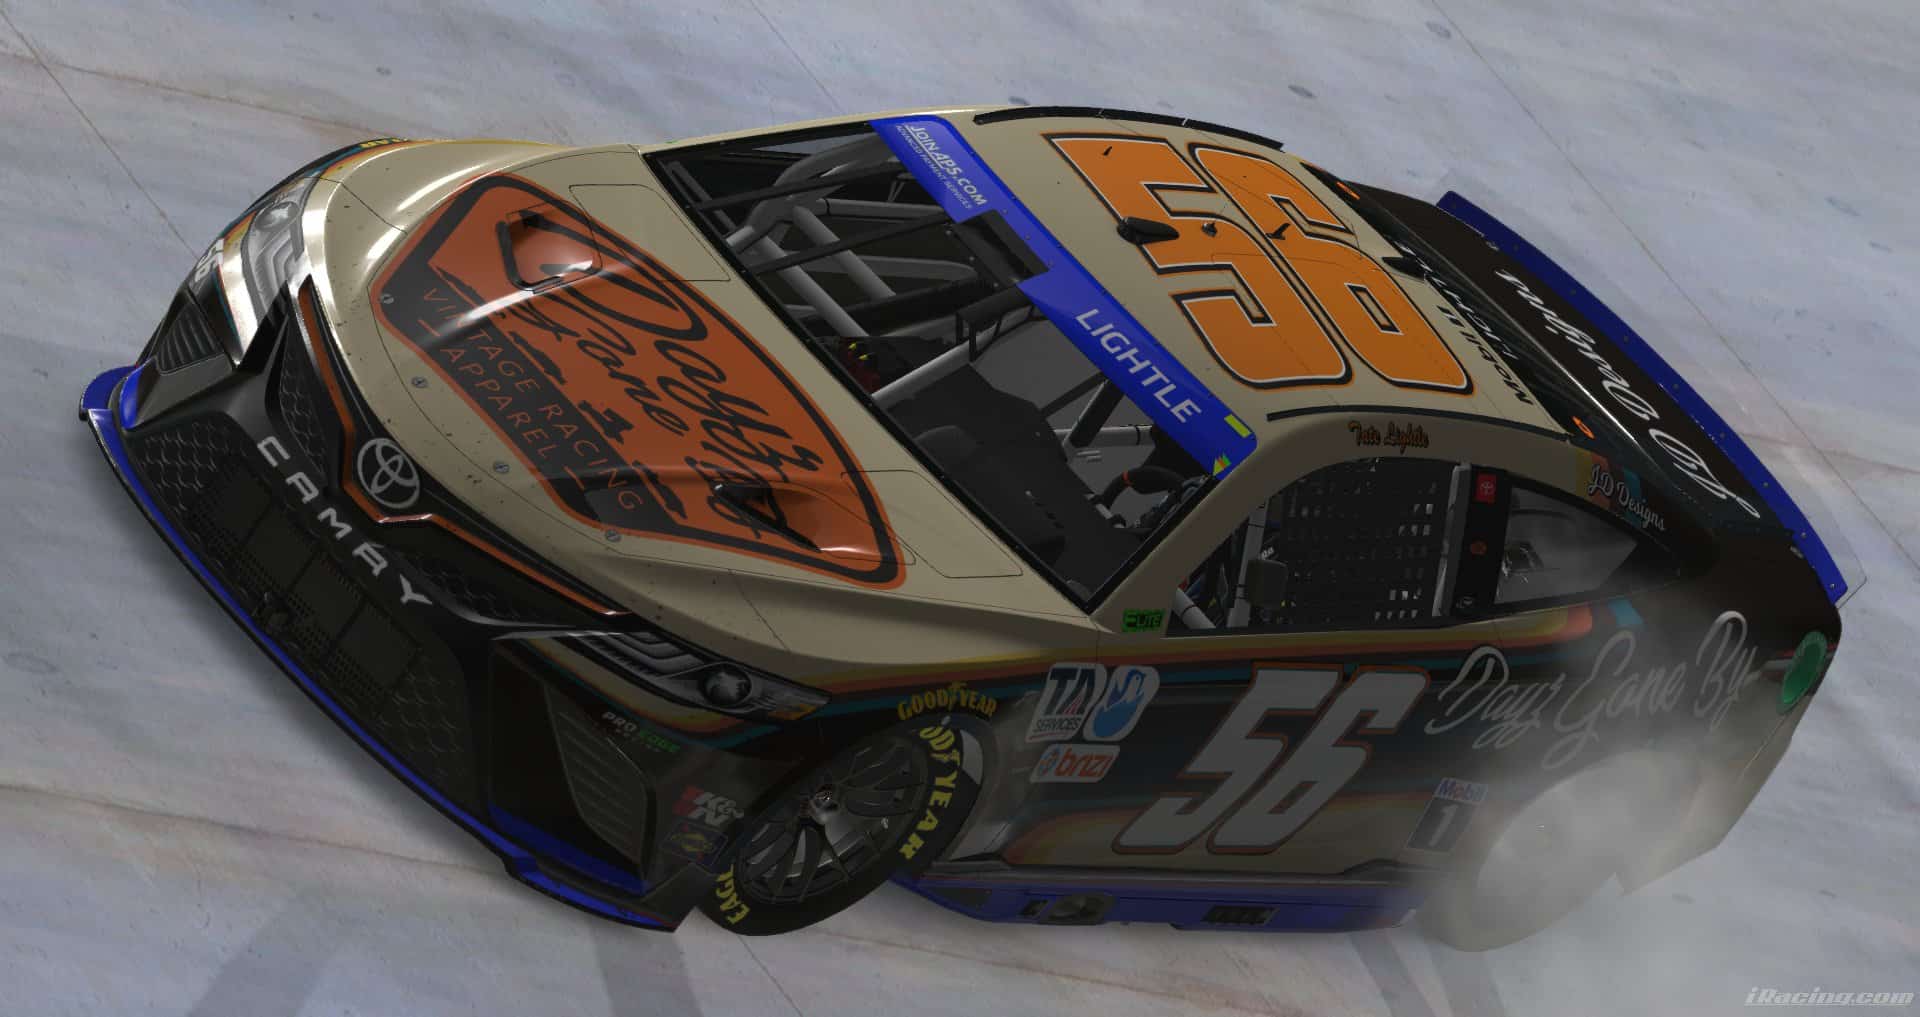 Tate Lightle scored the Elite Racing League's JoinAPS.com Cup Series championship as teammate Josh Adams won the race at Nashville Superspeedway on iRacing.